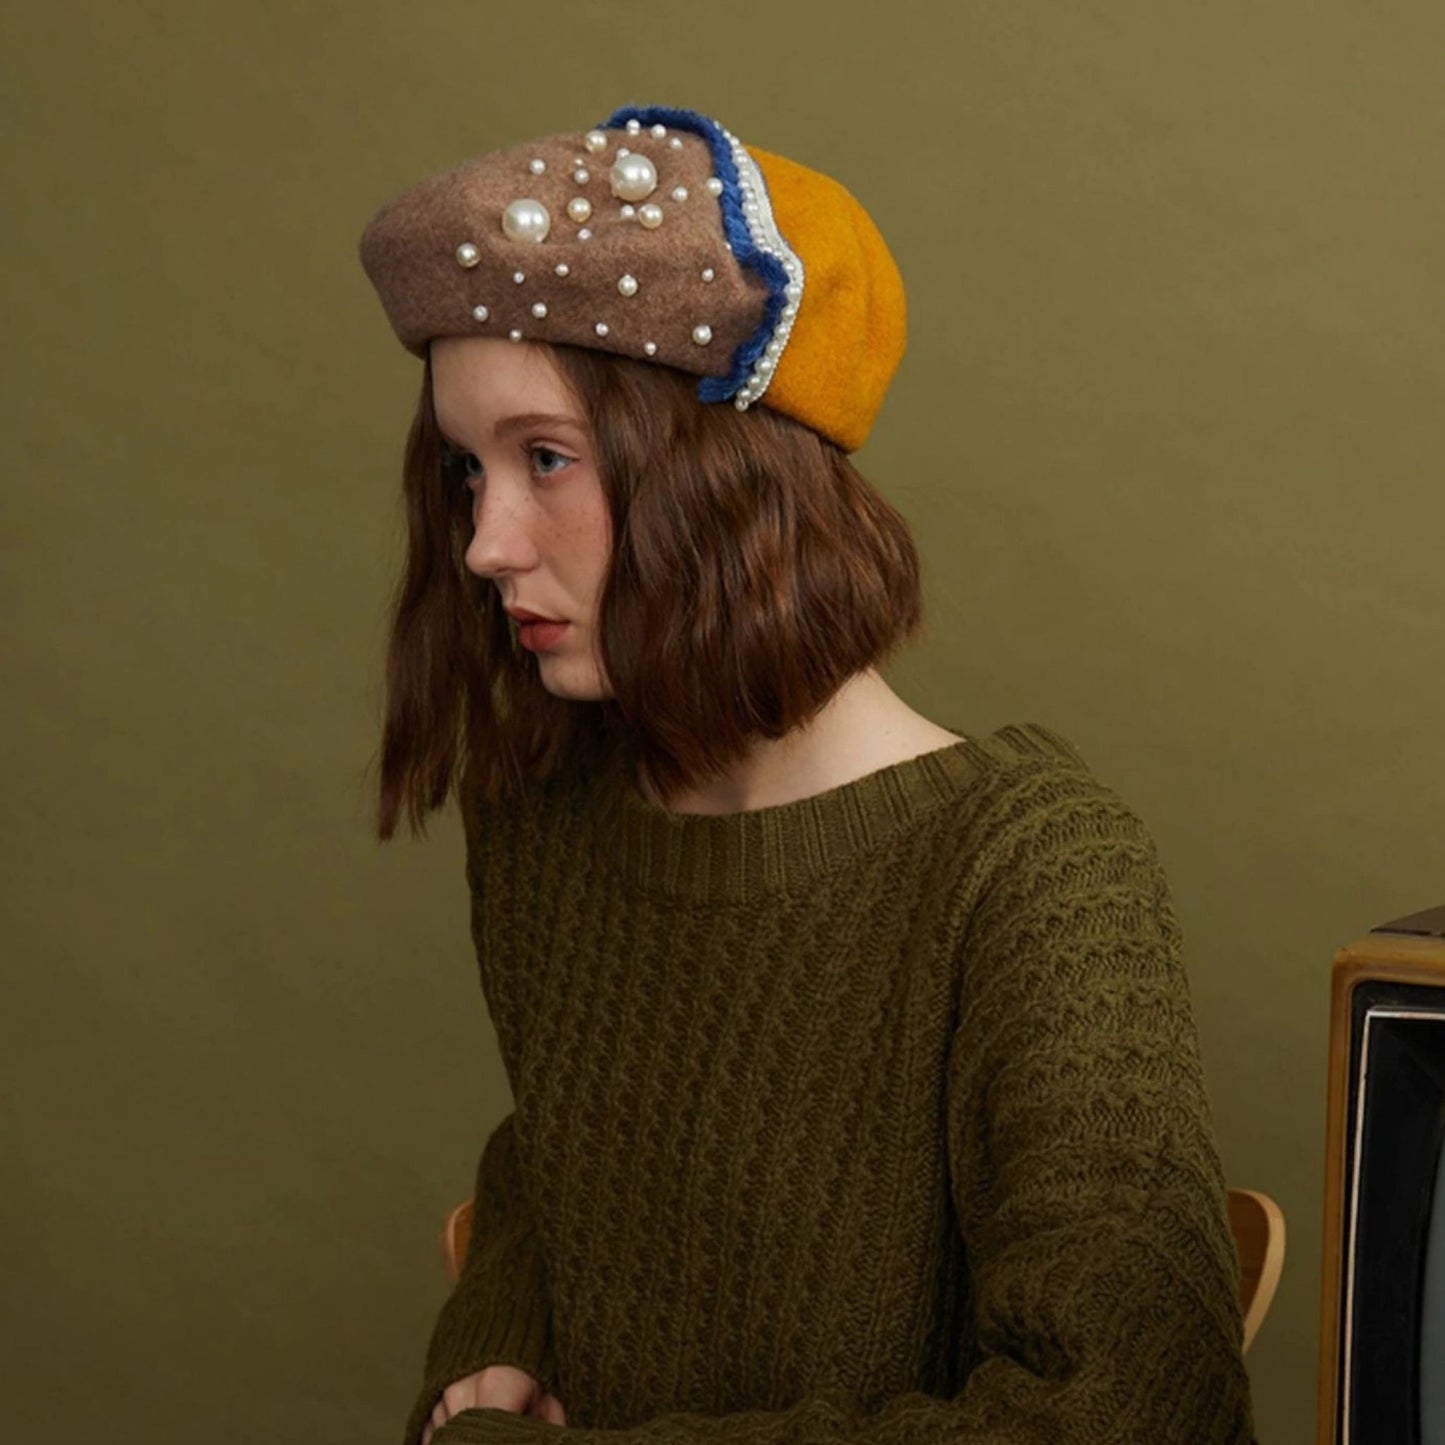 Handmade Wool Beret Hat with Pearls for Women